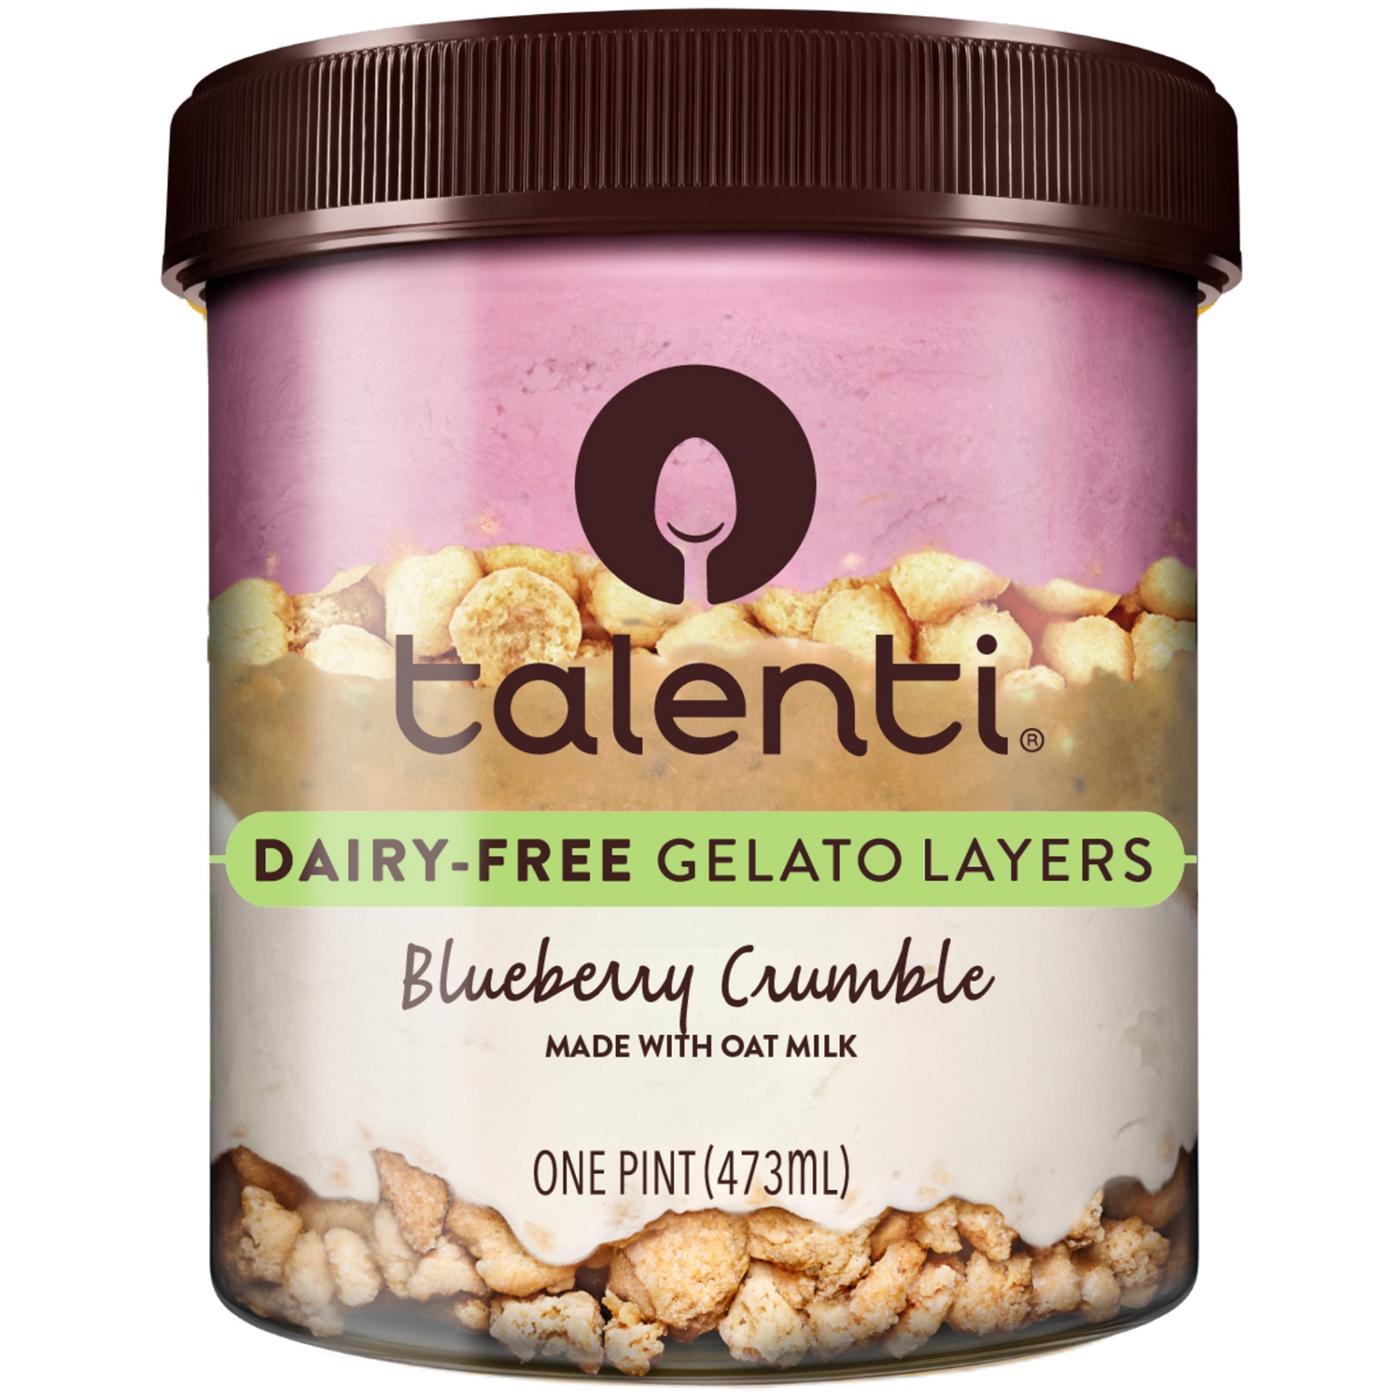 Talenti Dairy-Free Gelato Layers Blueberry Crumble; image 1 of 8